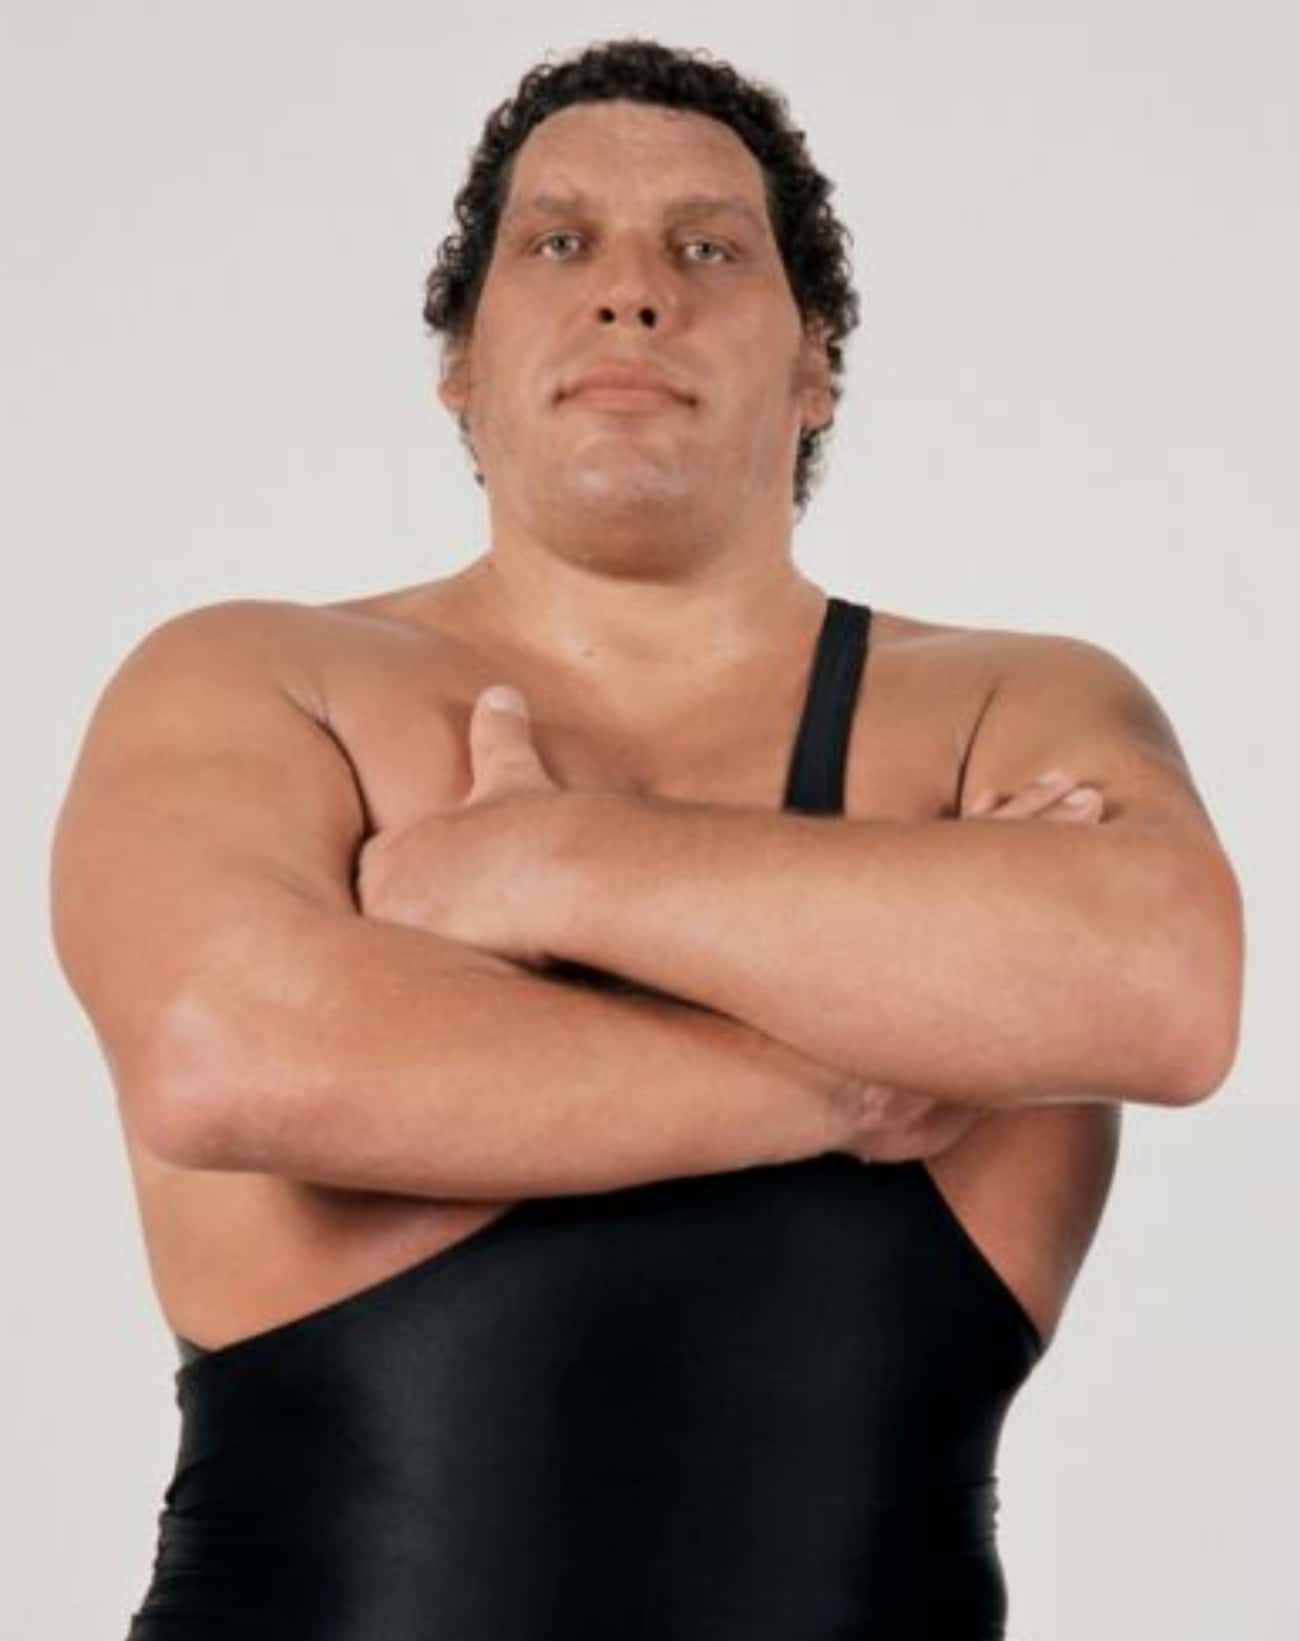 André The Giant Wore His Cross-Body Singlet Because He Had Back Problems